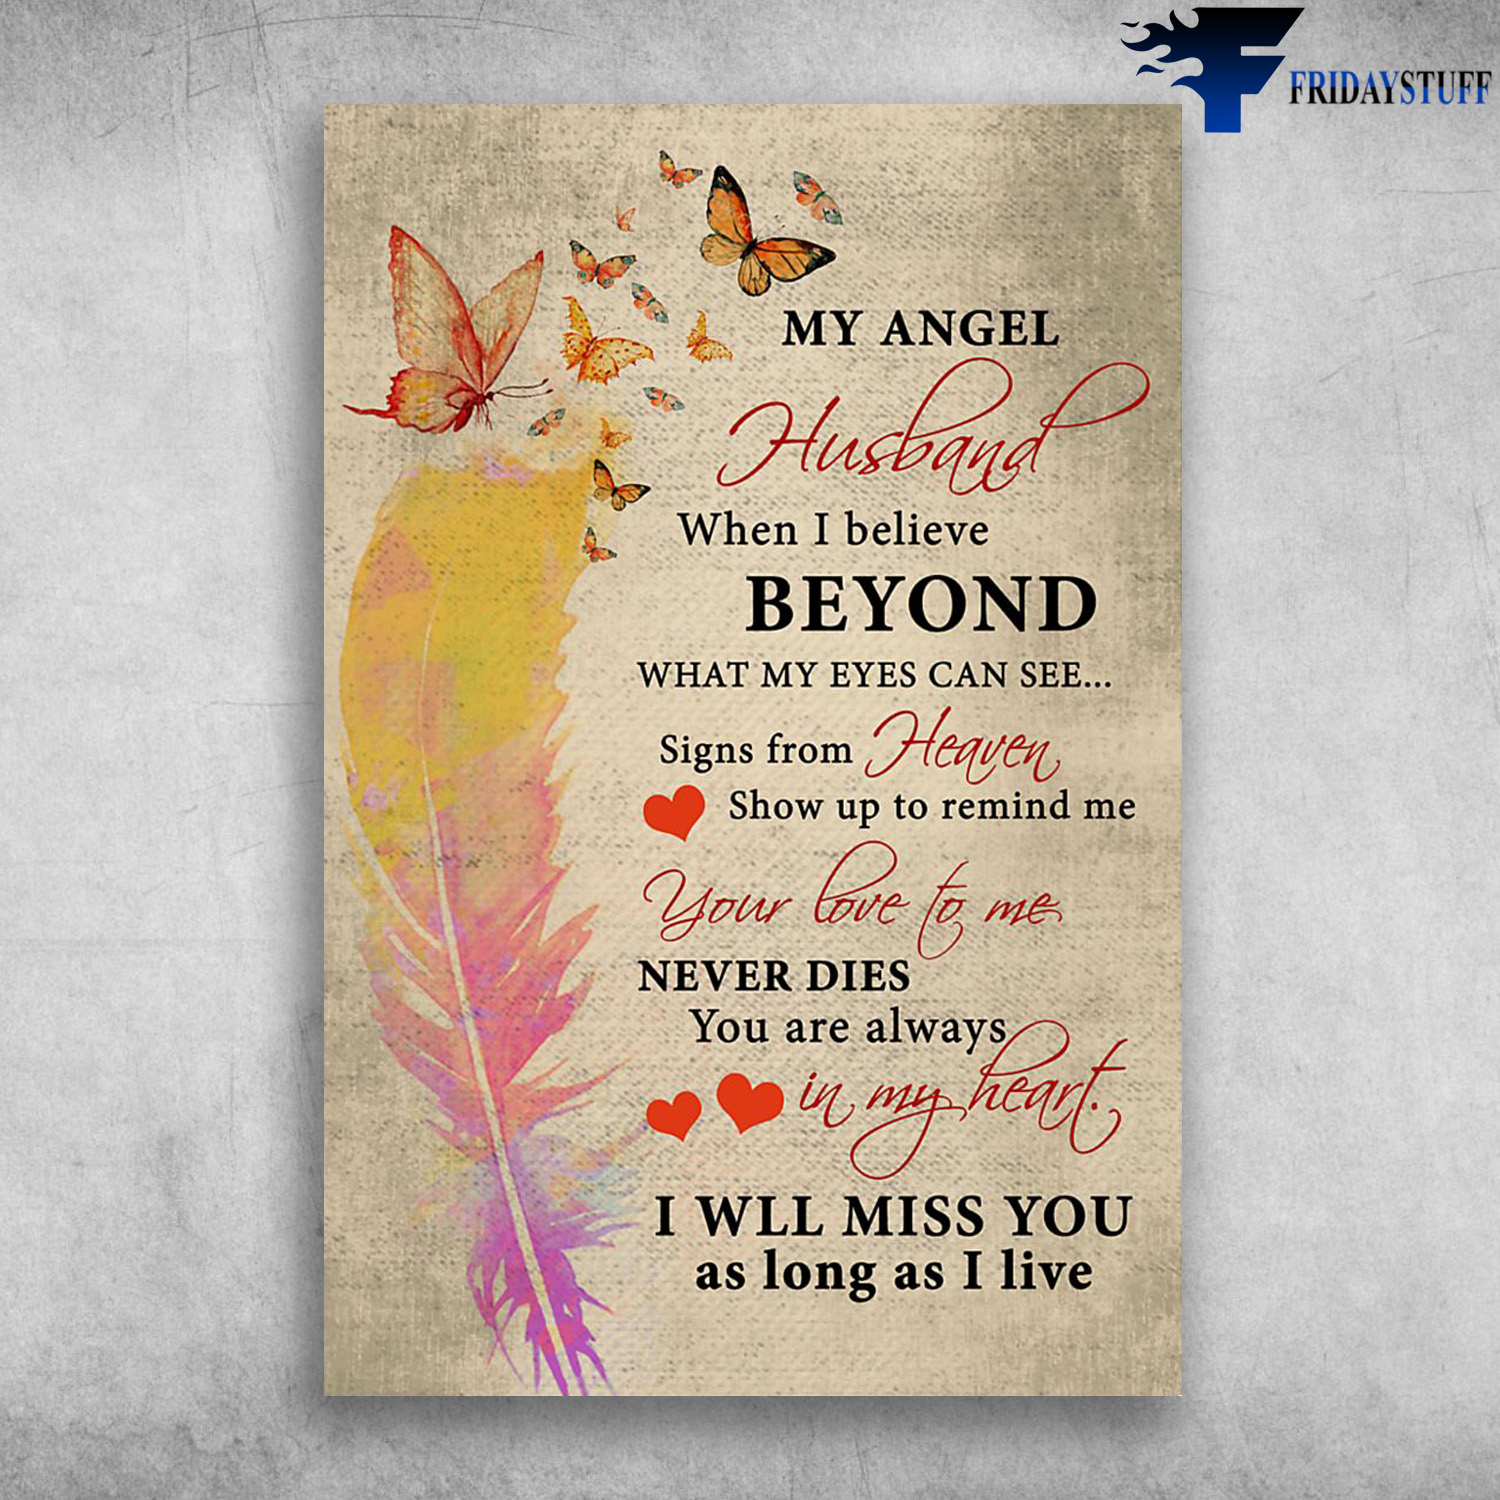 Butterfly And Feathers - My Angel Husband, When I Believe Beyond, What My Eyes Can See, Signs From Heaven, Show Up To Remind Me, Your Love To Me, Never Dies, You Are Always In My Heart, I Will Miss You As Long As I Live